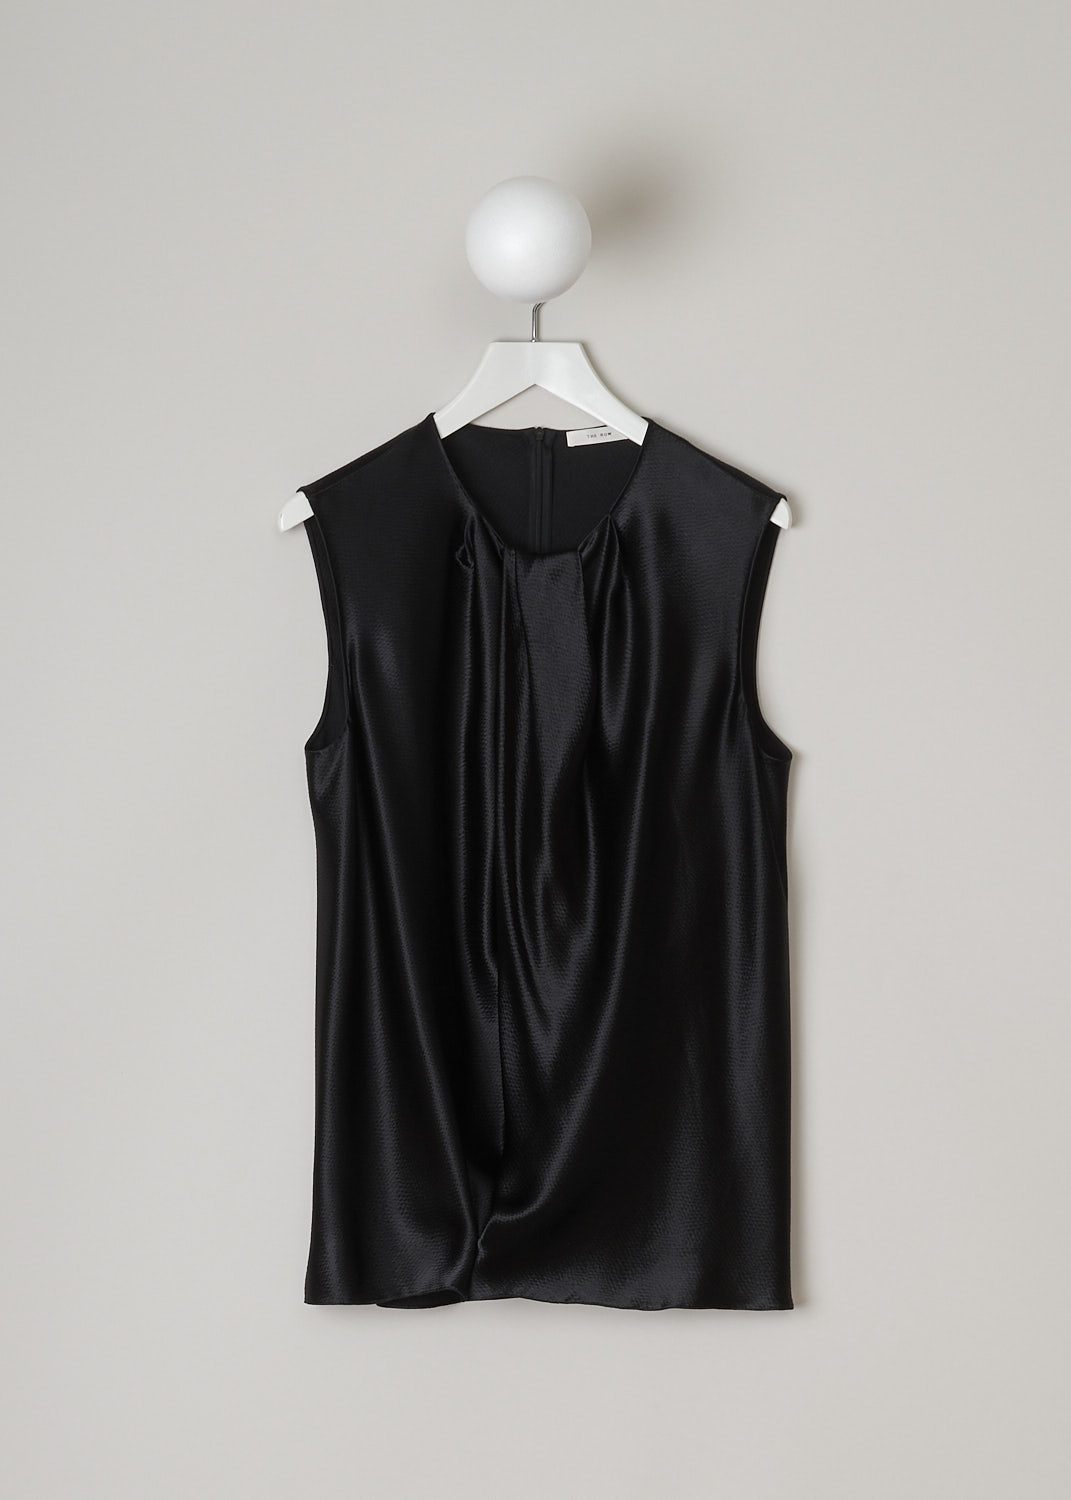 THE ROW, HAMMERED SATIN TOP IN BLACK, SHIRA_TOP_4923WI_616_BLACK,  Black, Front, This hammered satin sleeveless top in black has a round neckline with a pleated front detailing. In the back, a concealed centre zip can be found. The top has a wider silhouette.
